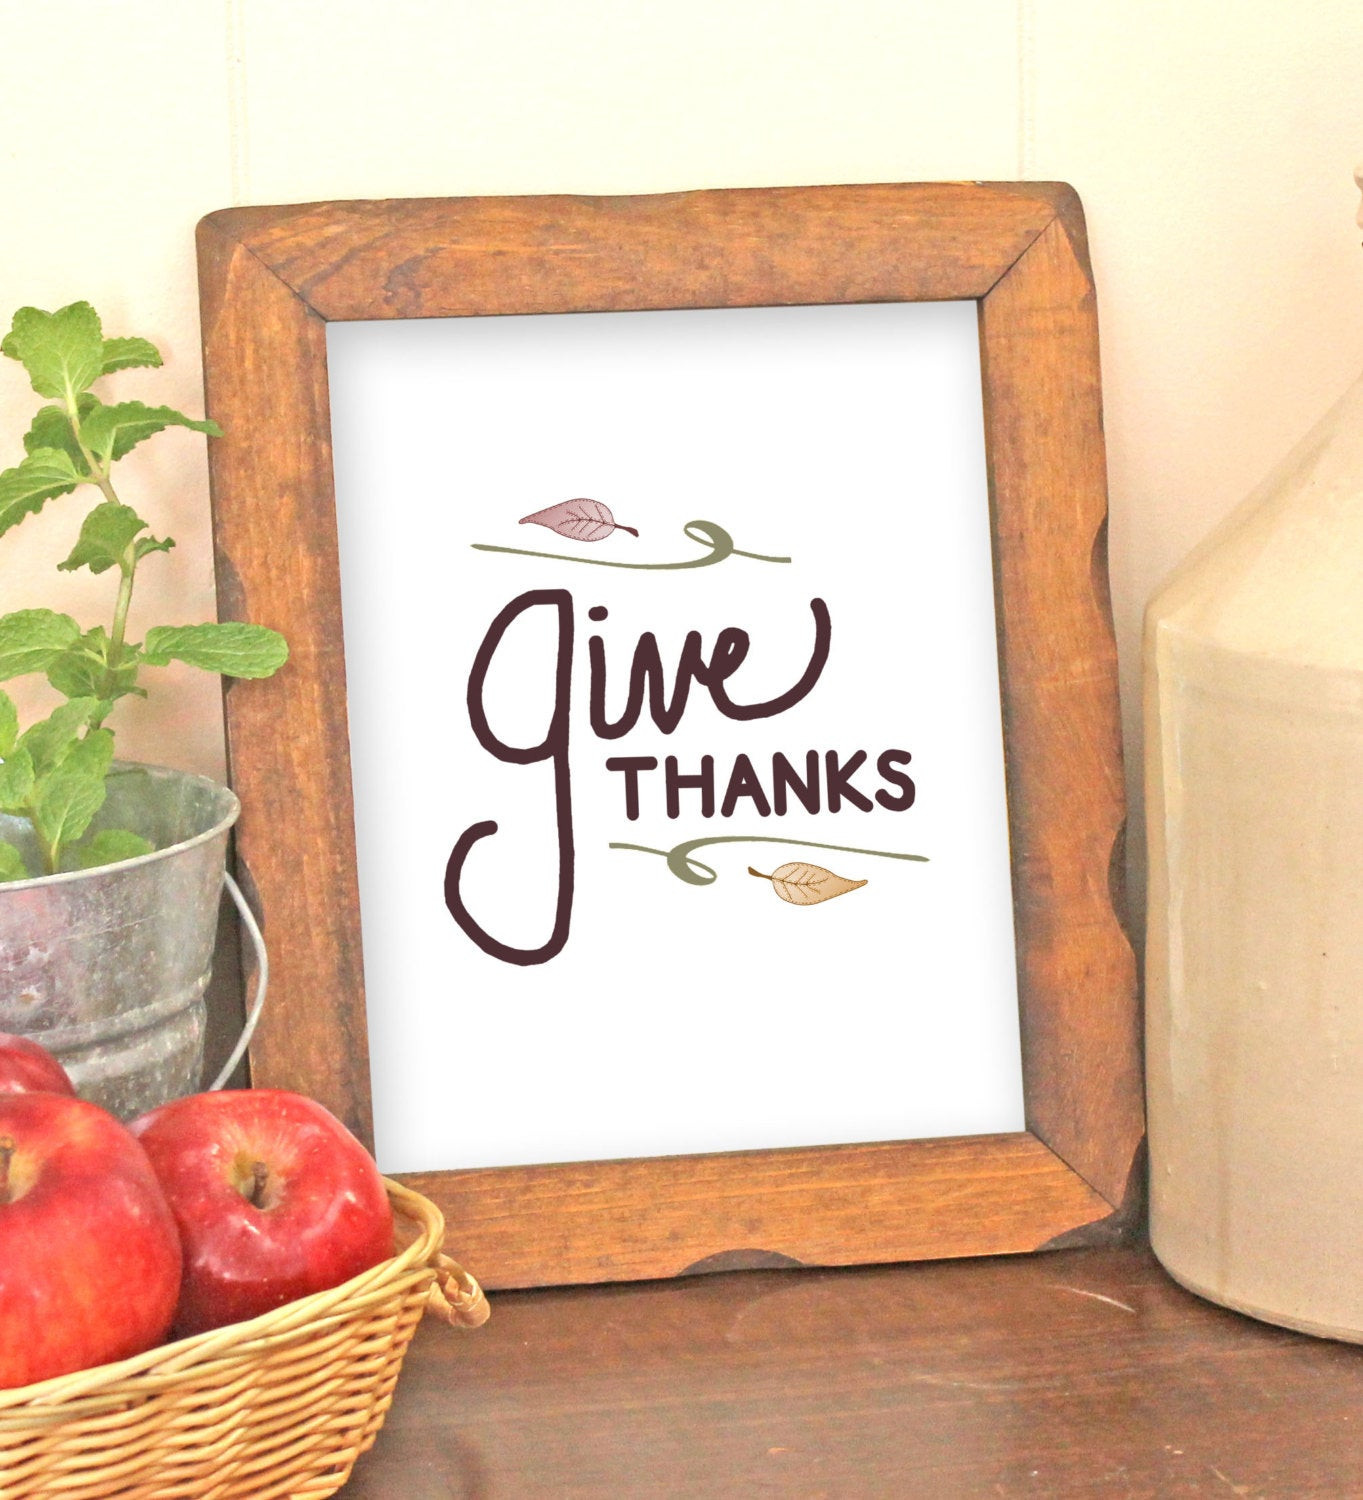 Thanksgiving Wall Decor
 Thanksgiving Wall Art Printable Give Thanks by VLHamlinDesign